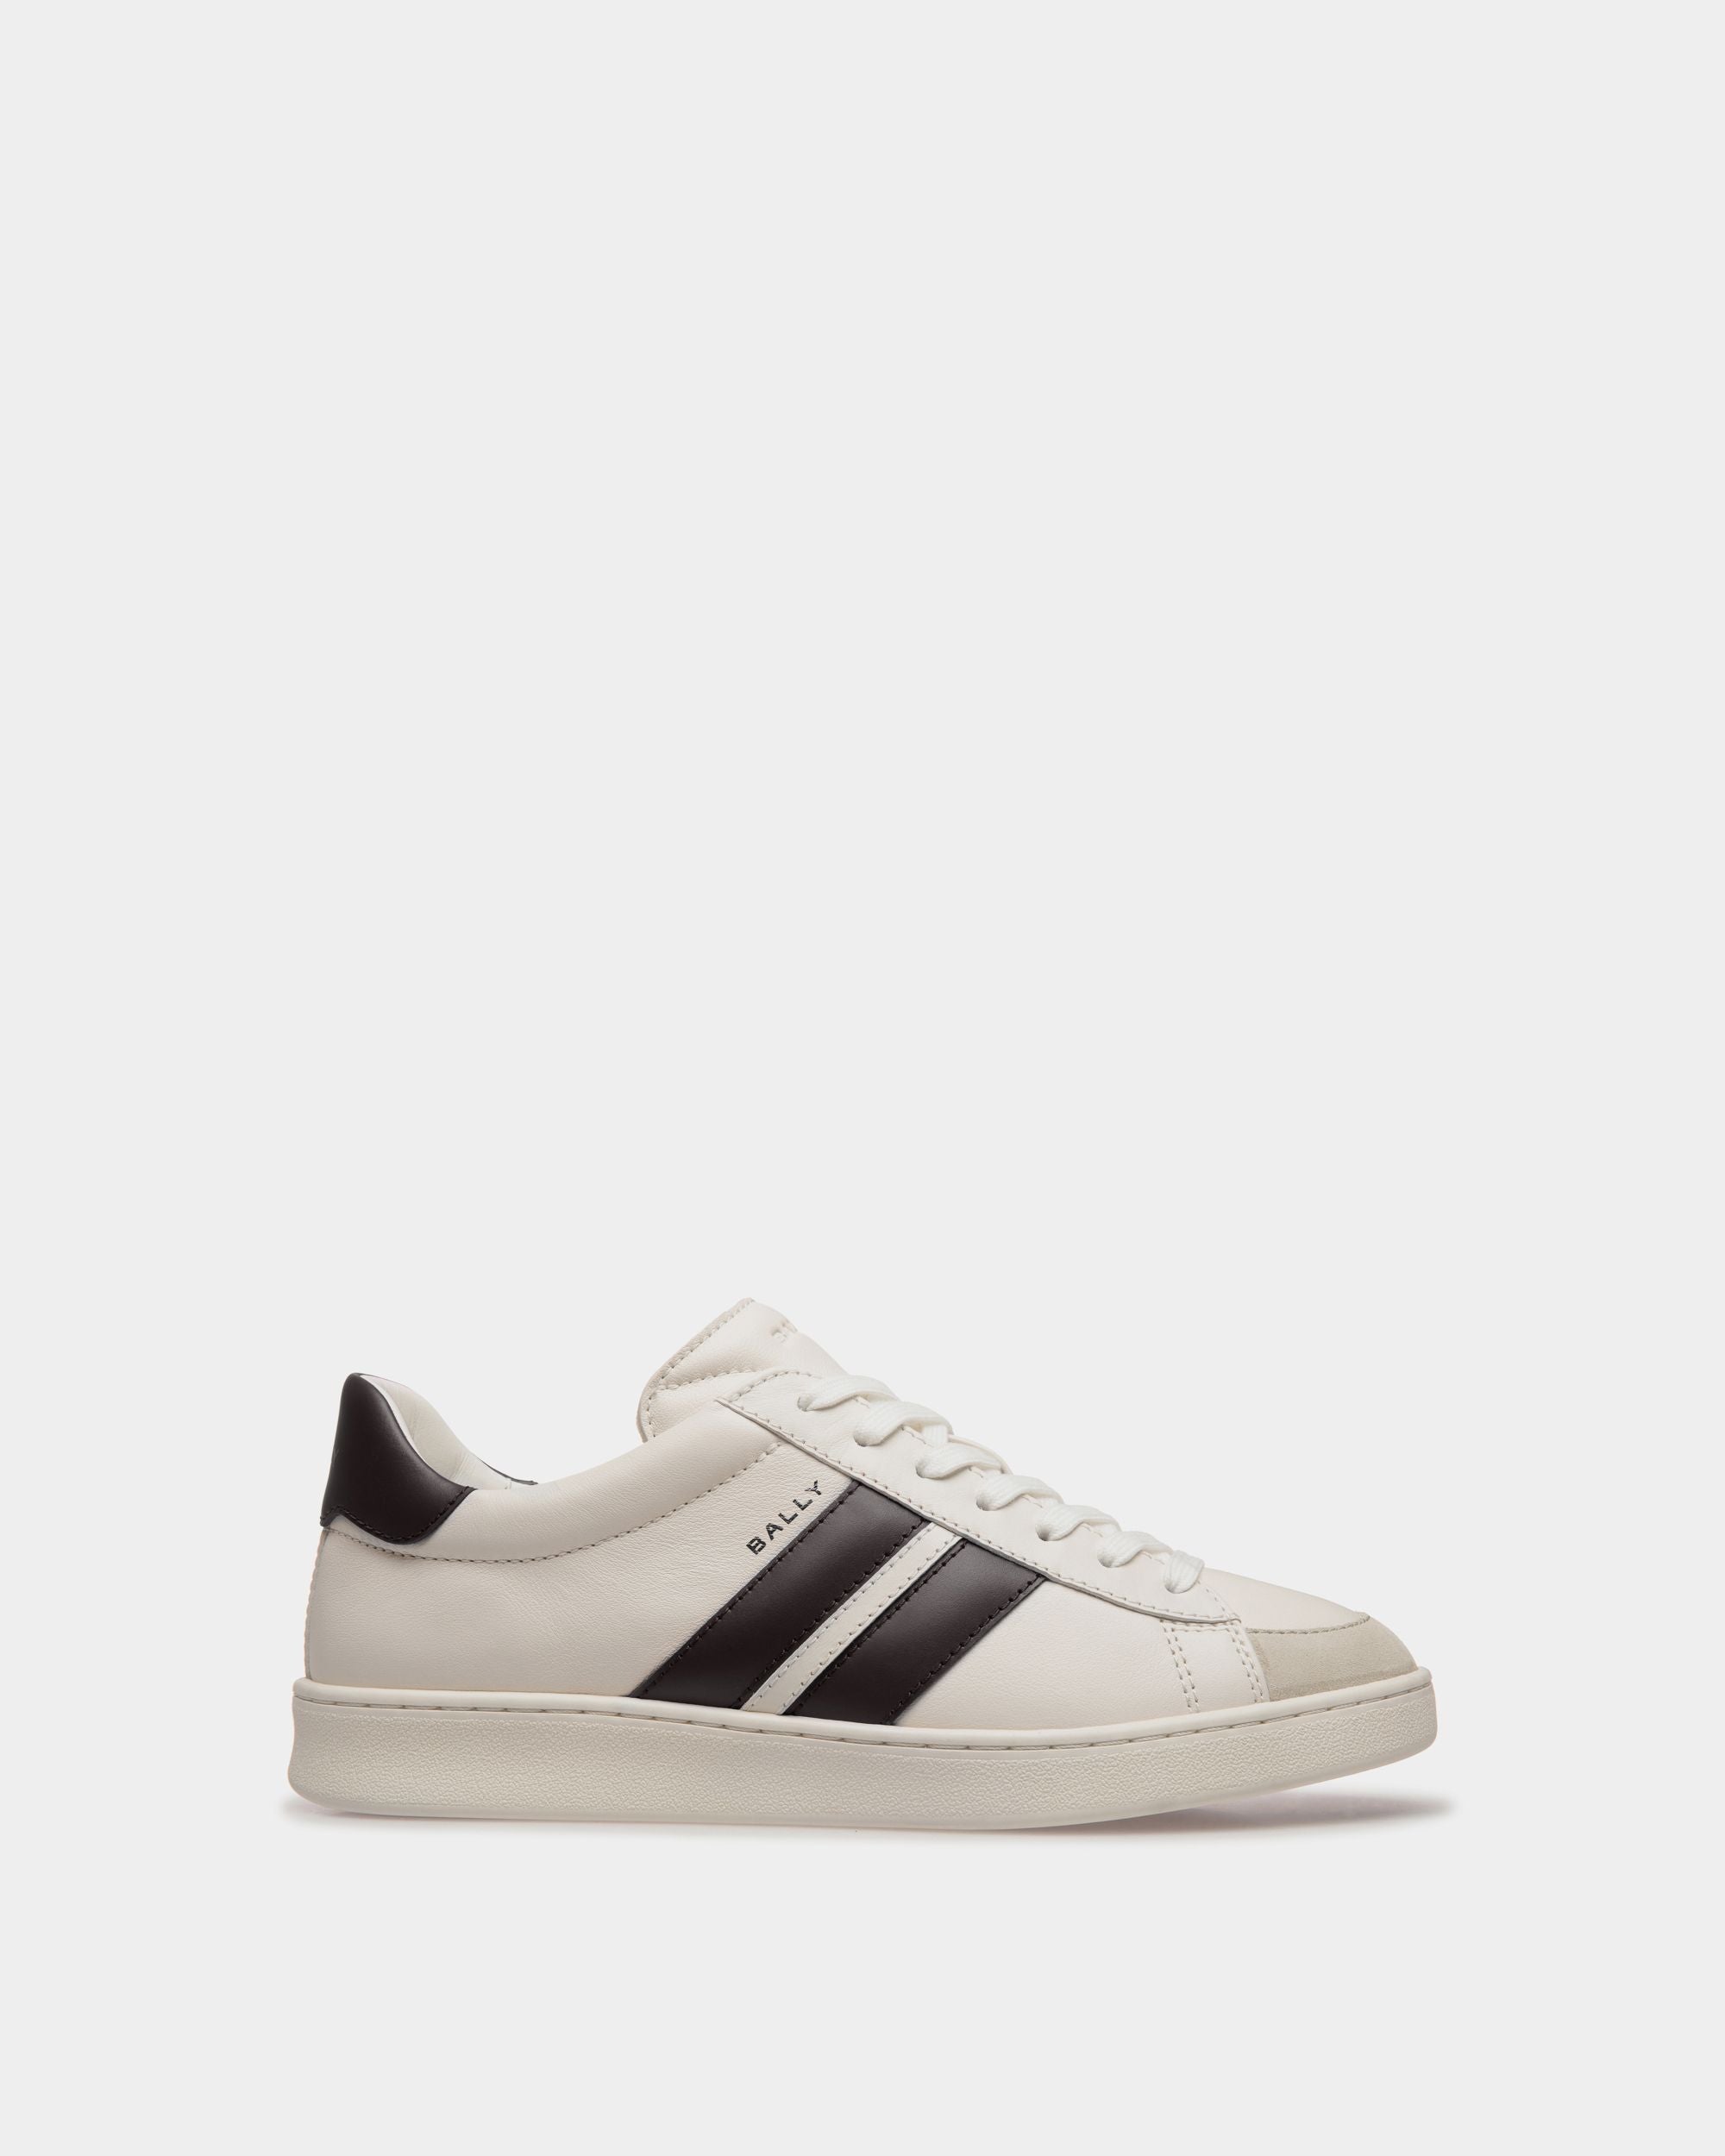 Women's Tennis Sneaker in White and Black Leather | Bally | Still Life Side